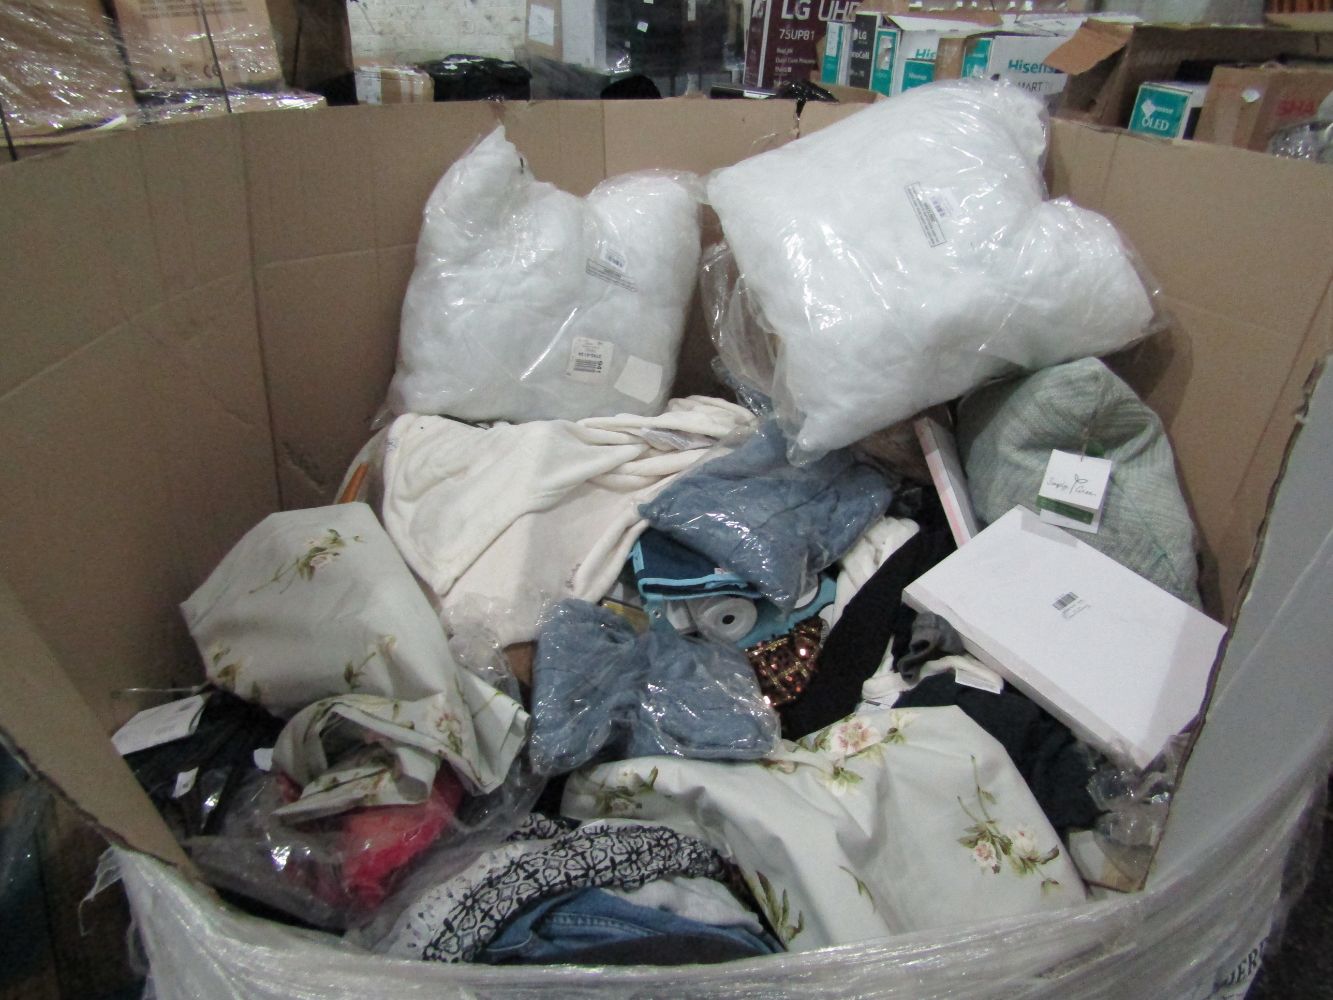 Pallet auction of Electricals, Clothing and General items